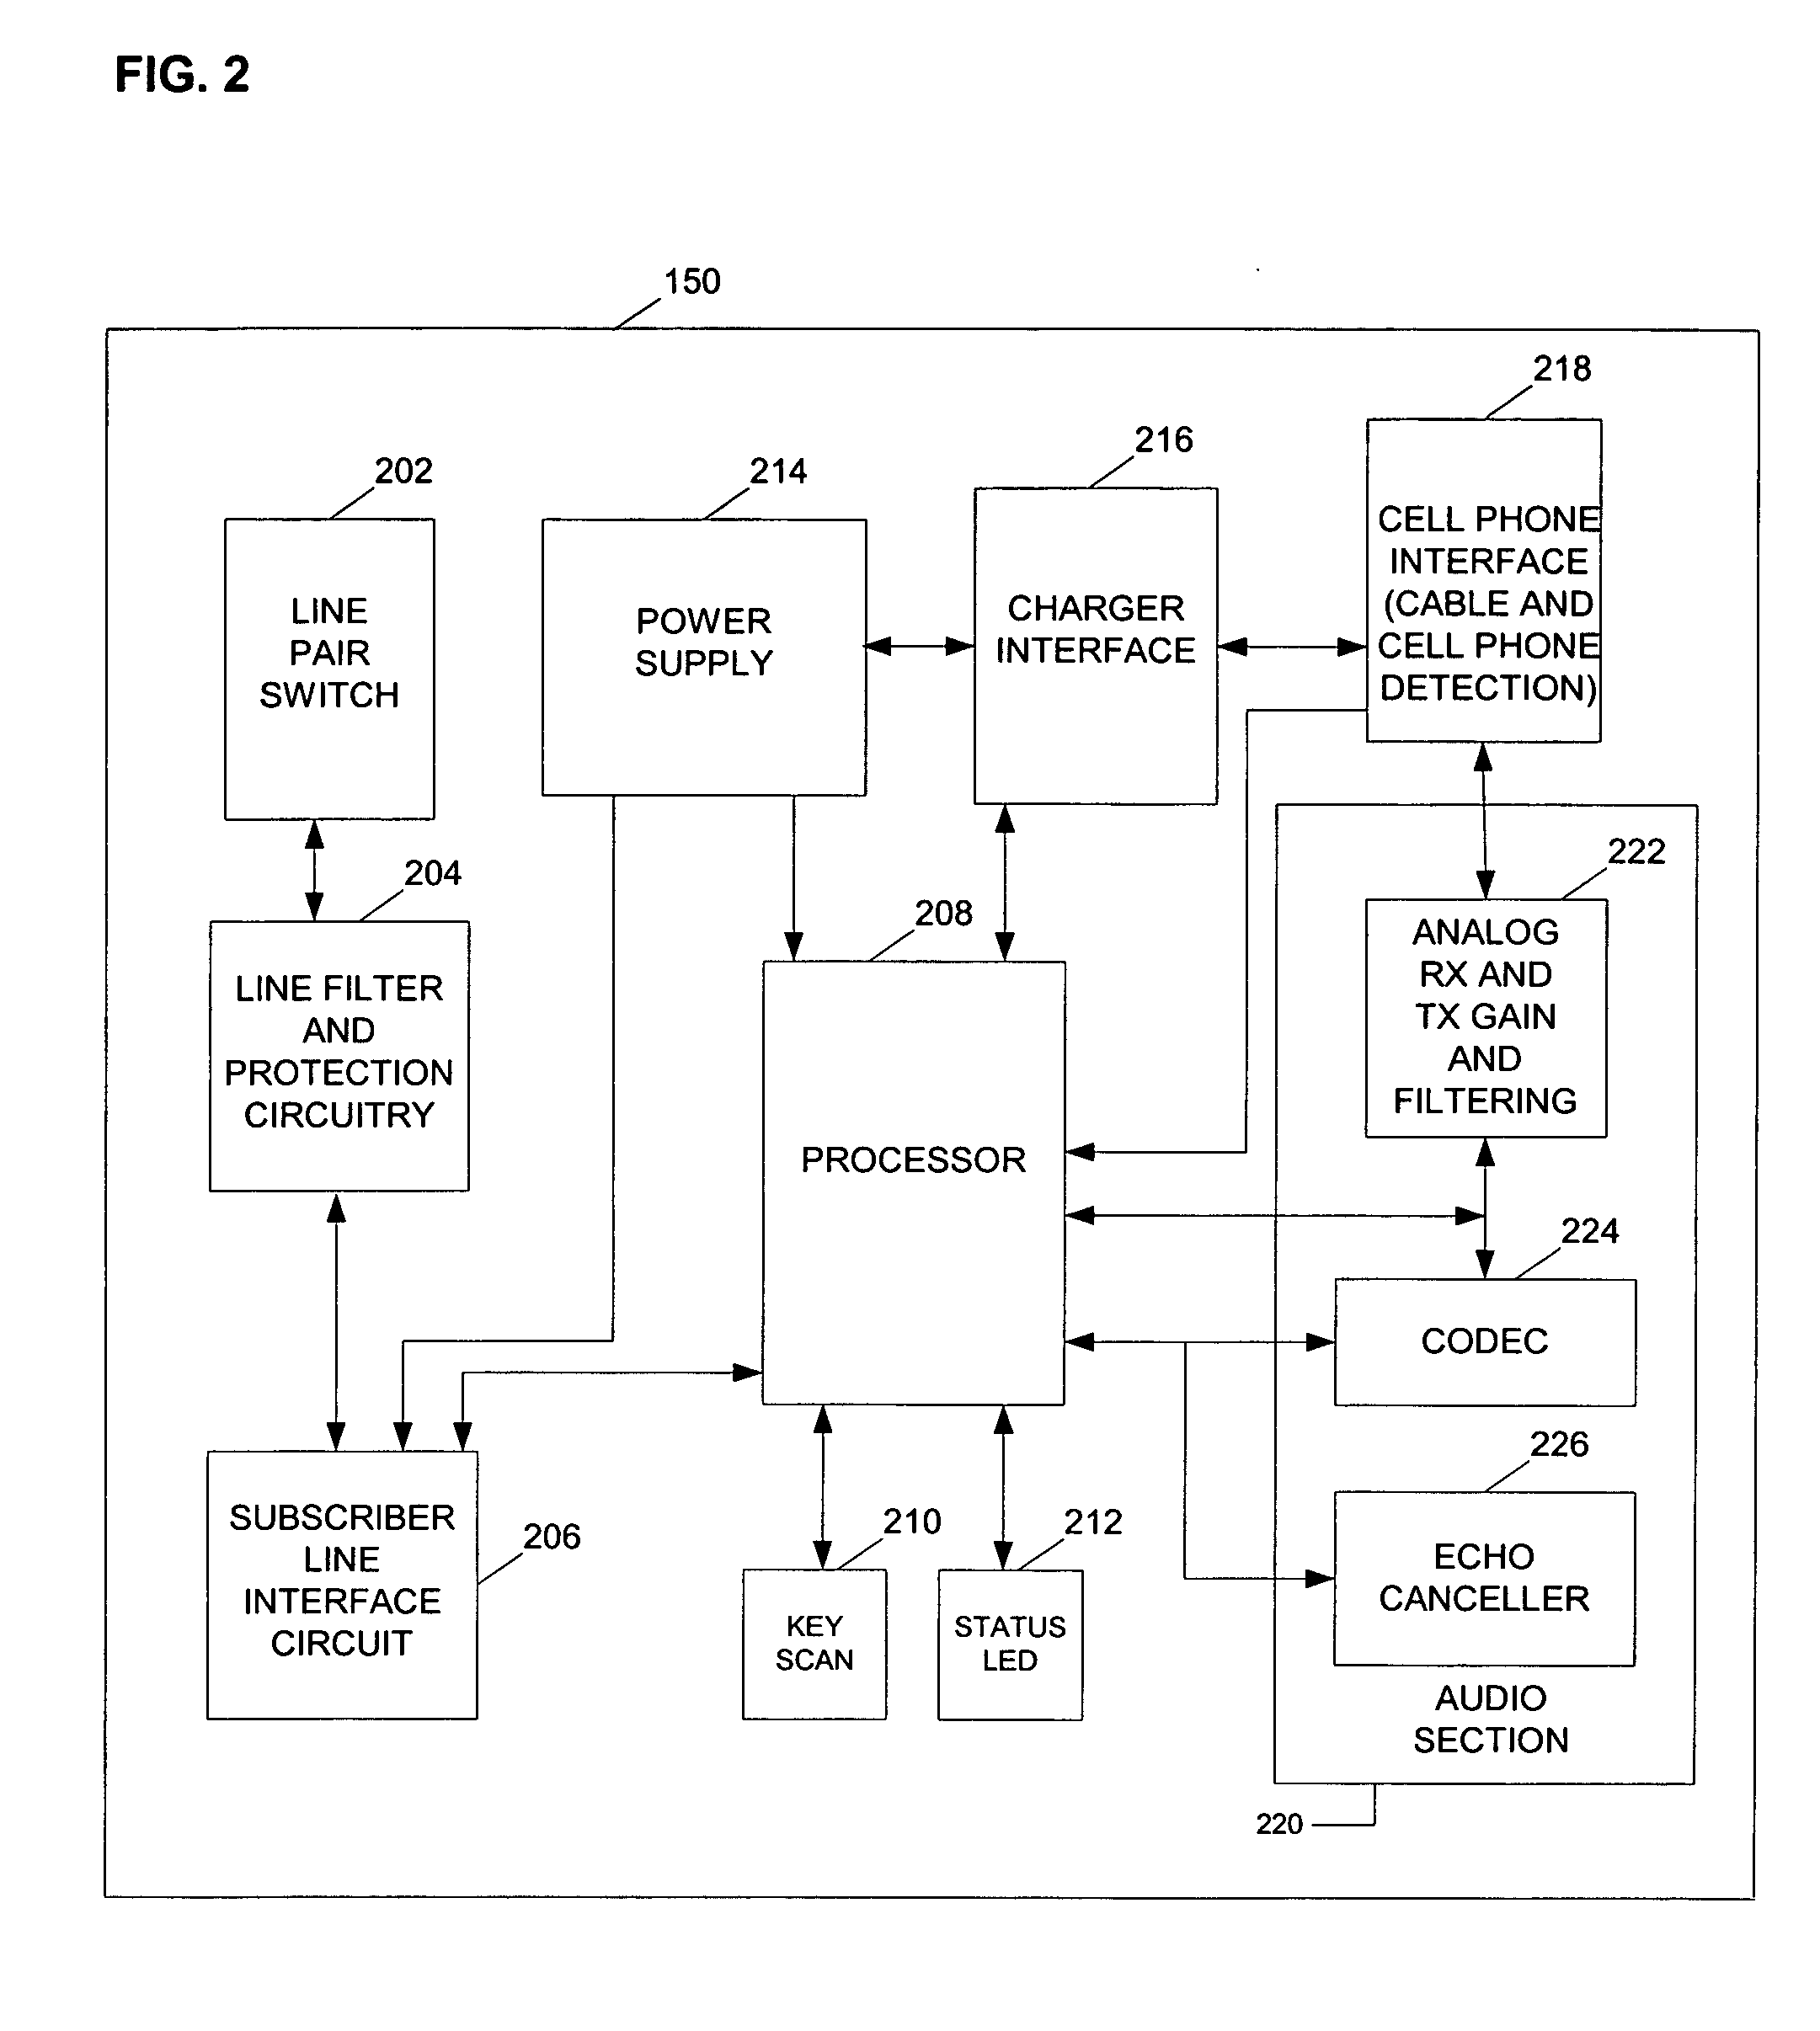 Telephone controller with intercom and paging functions and function for enabling landline telephones to send/receive calls via a mobile telephone